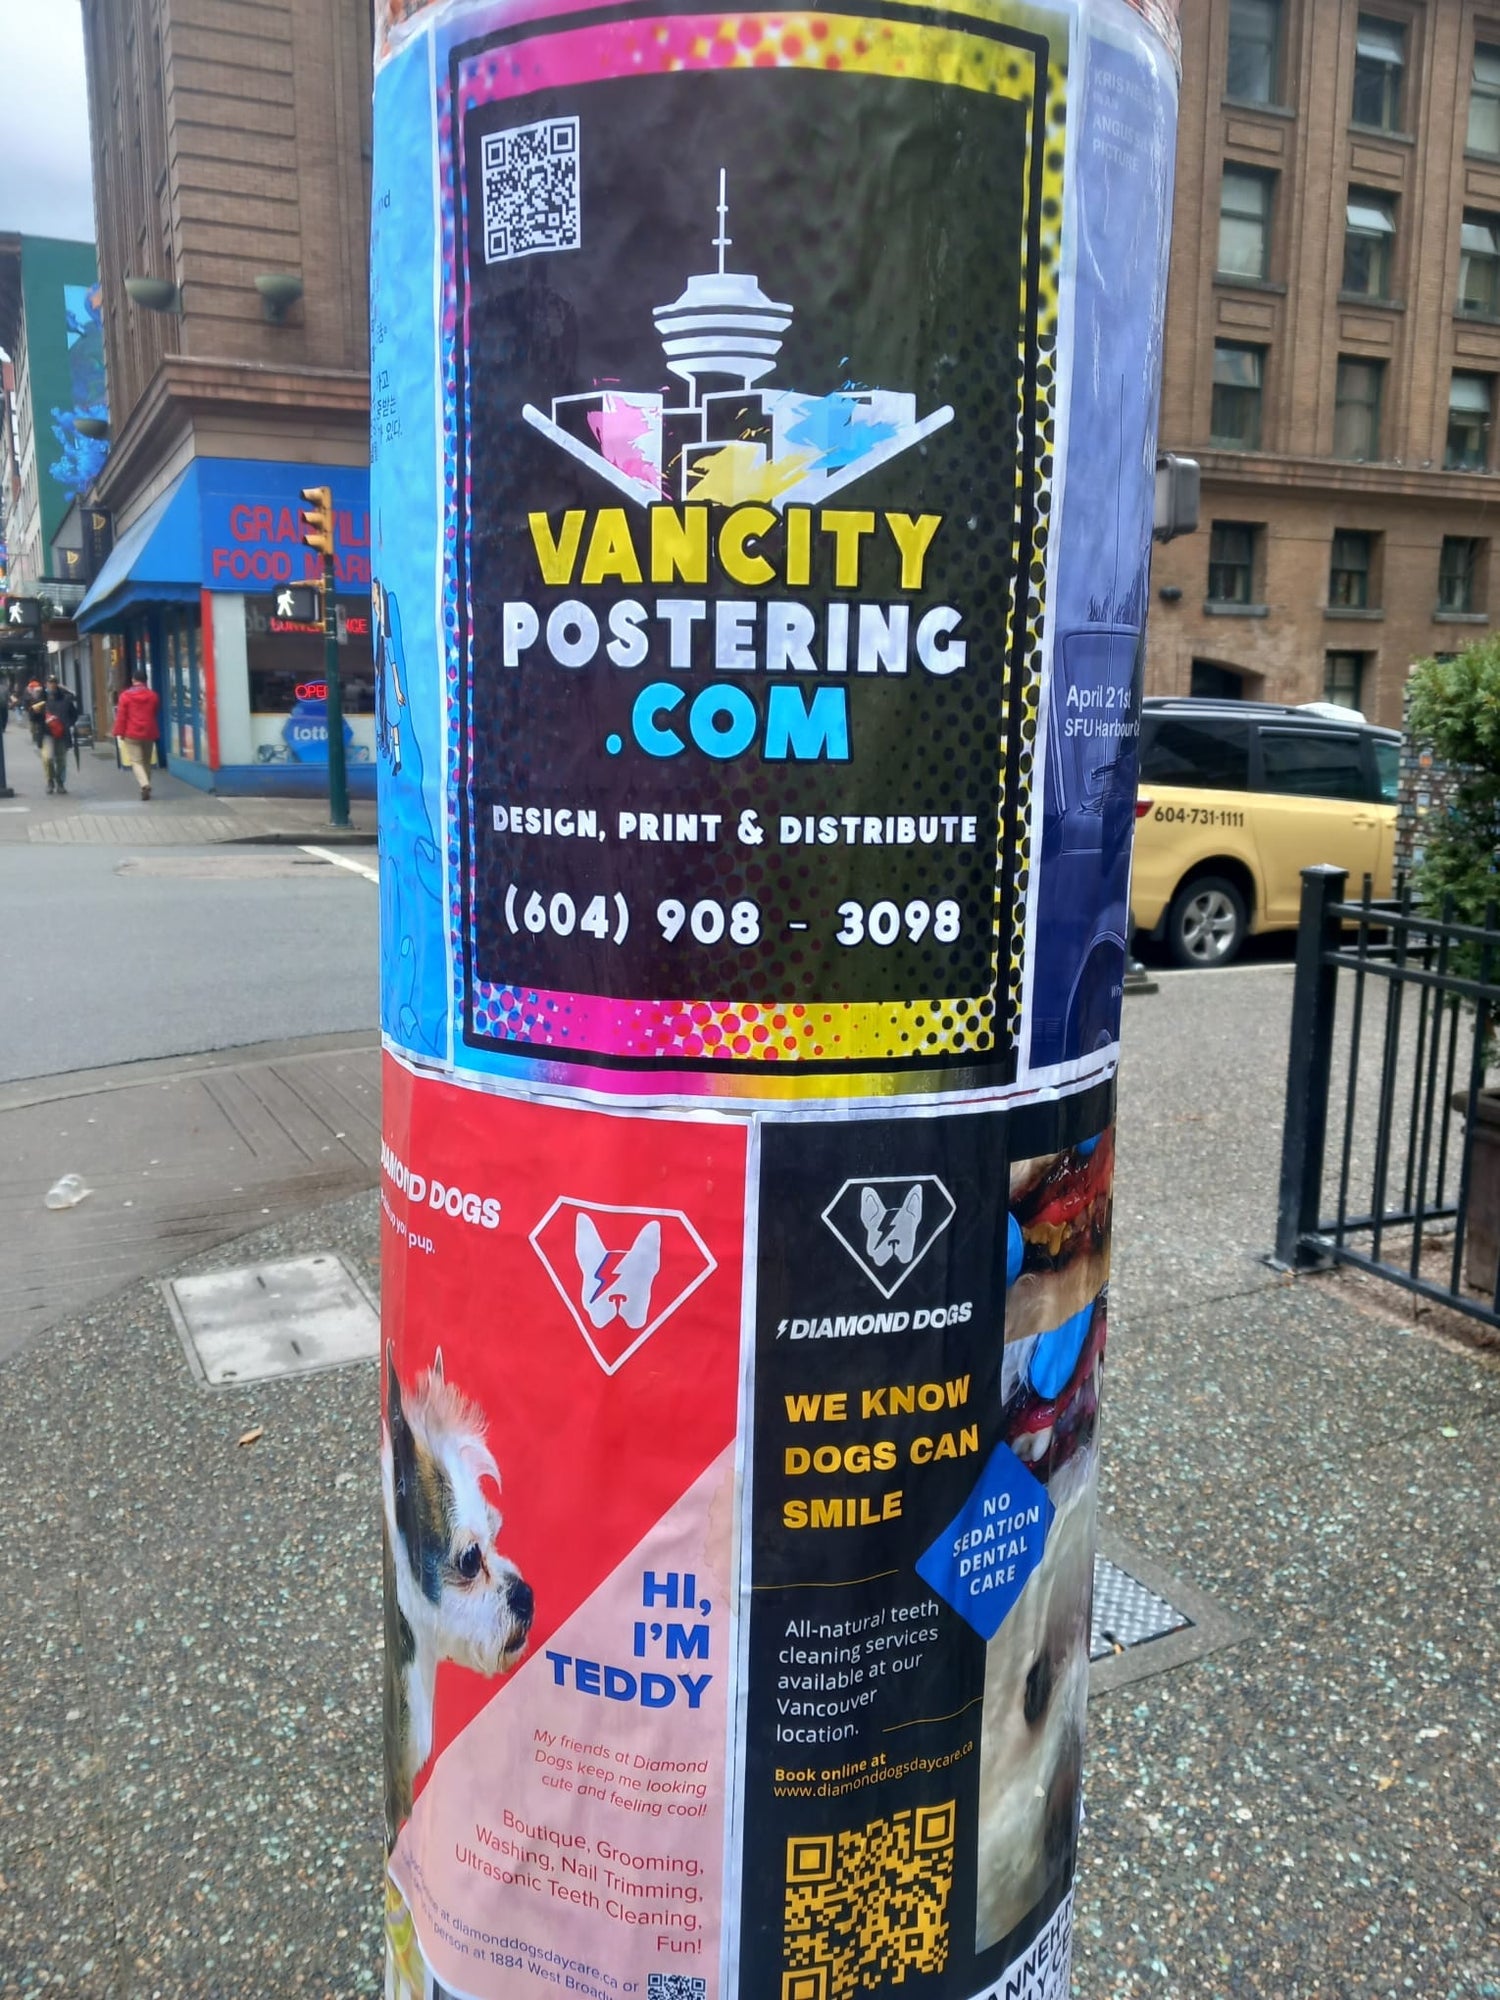 van city postering posters on a lamp post